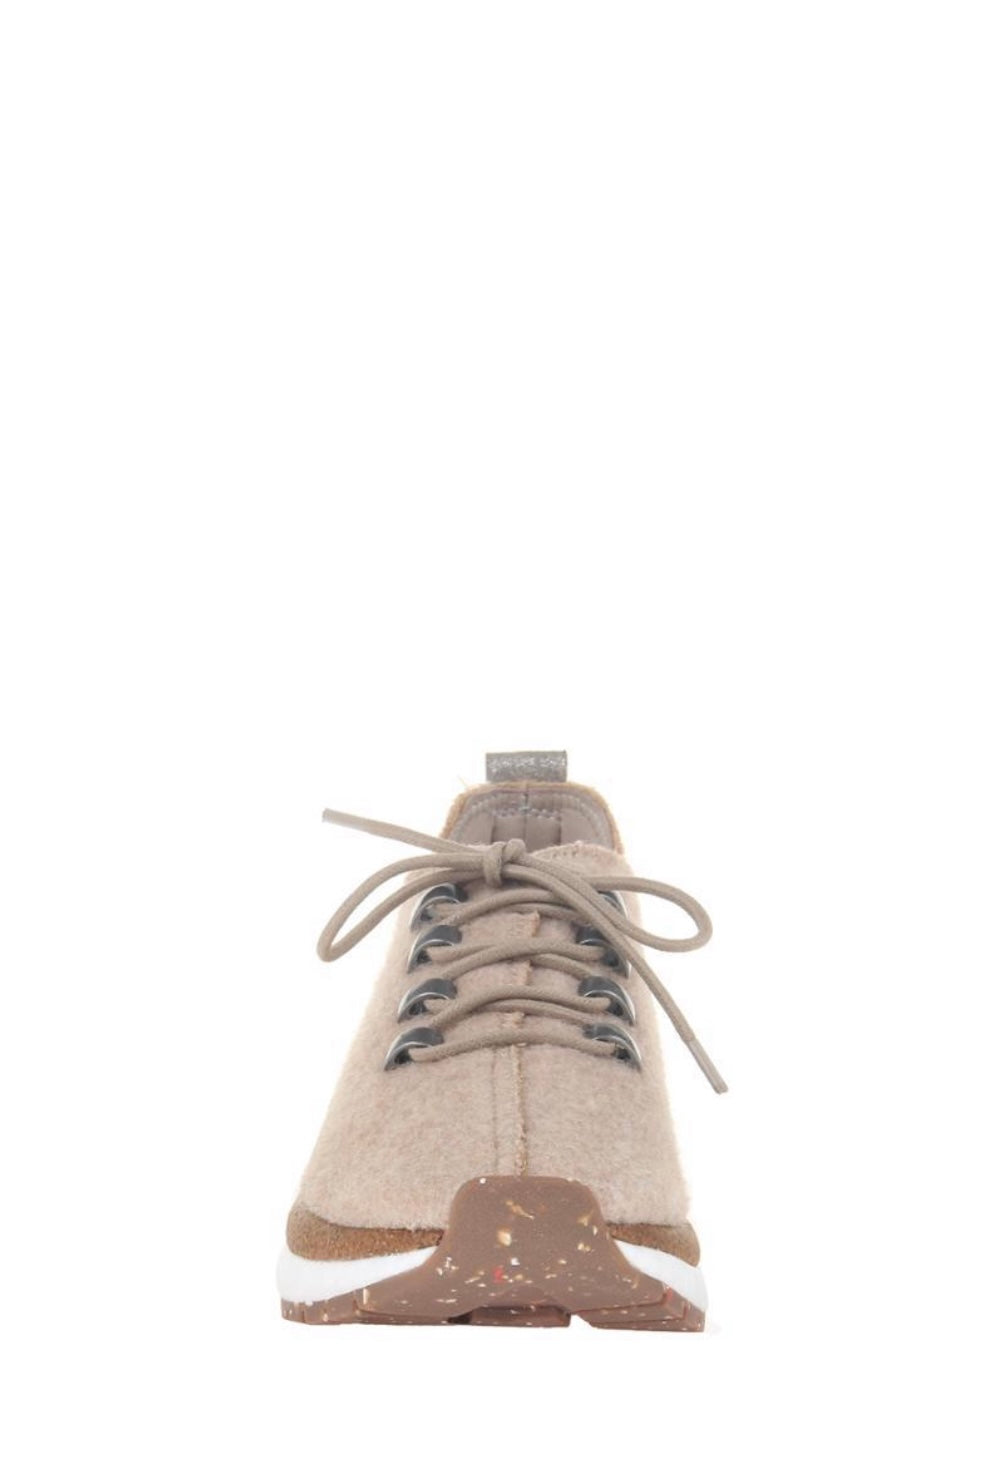 OTBT - COURIER in NATURAL Sneakers